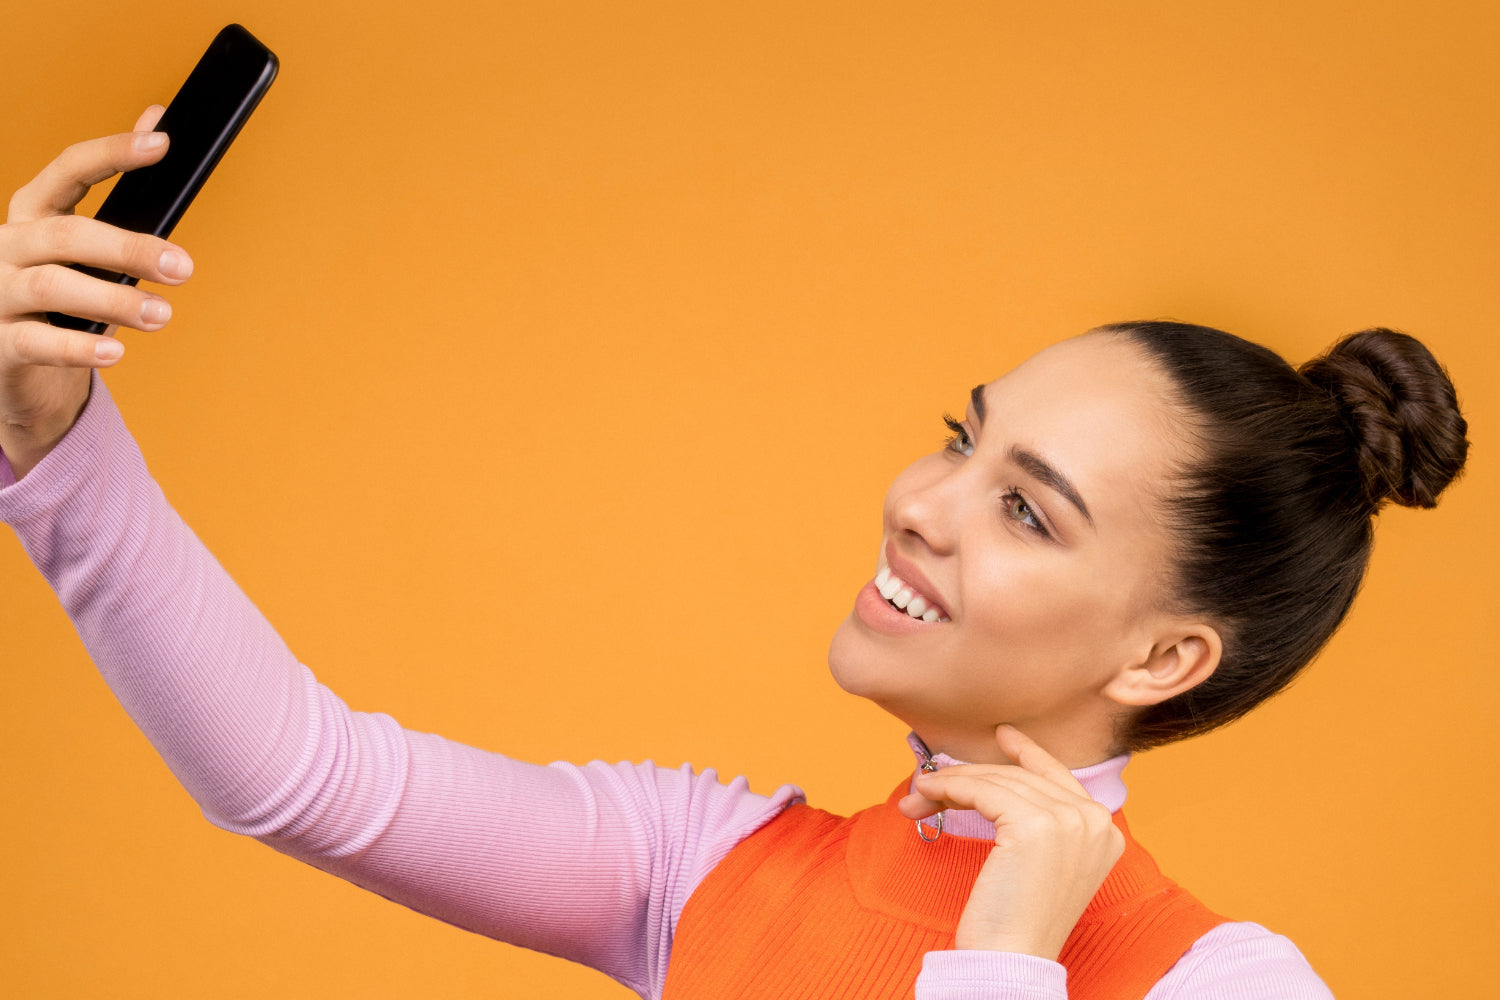 A person takes a selfie with a mobile phone